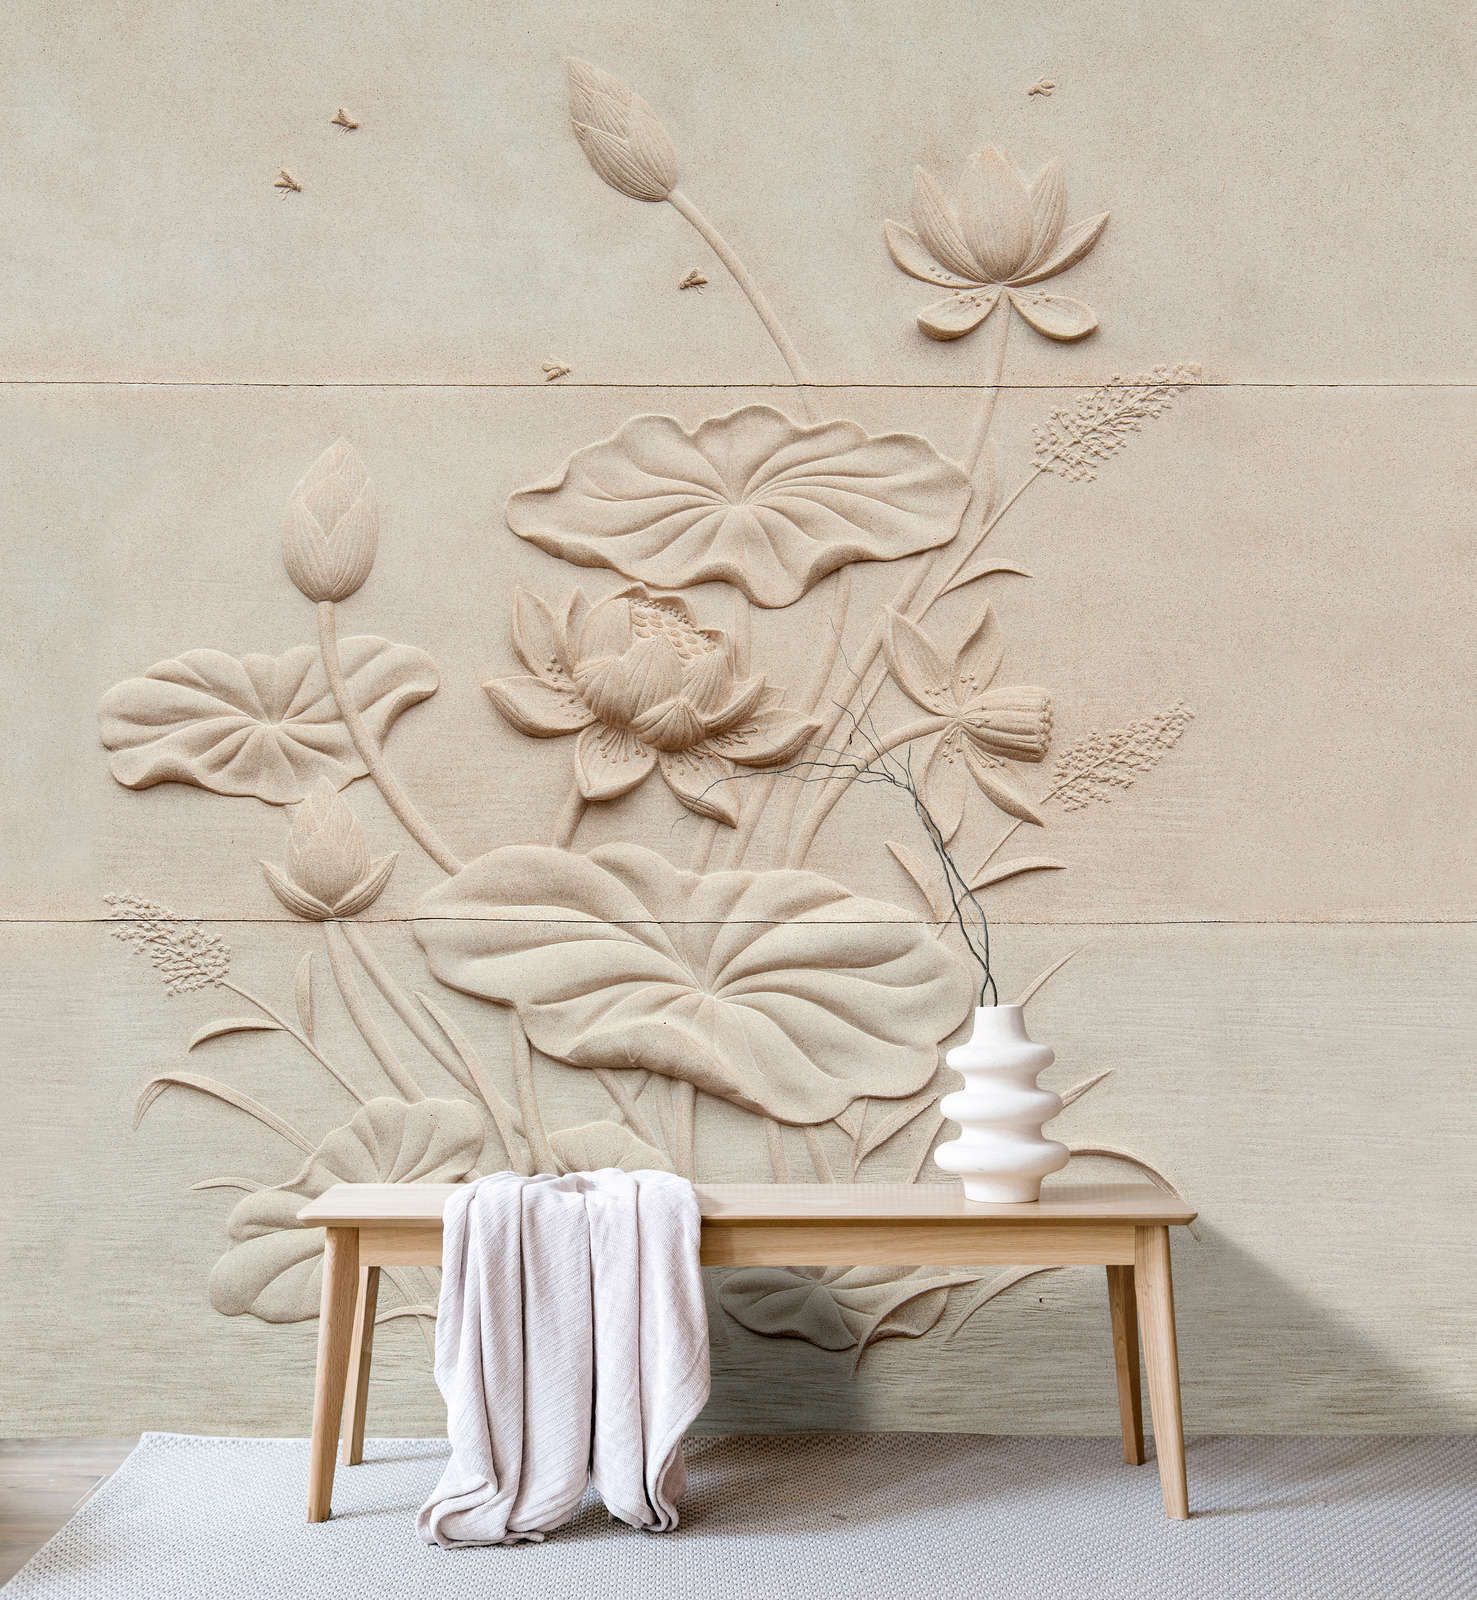             Photo wallpaper »fiore« - Floral relief on concrete structure - Lightly textured non-woven fabric
        